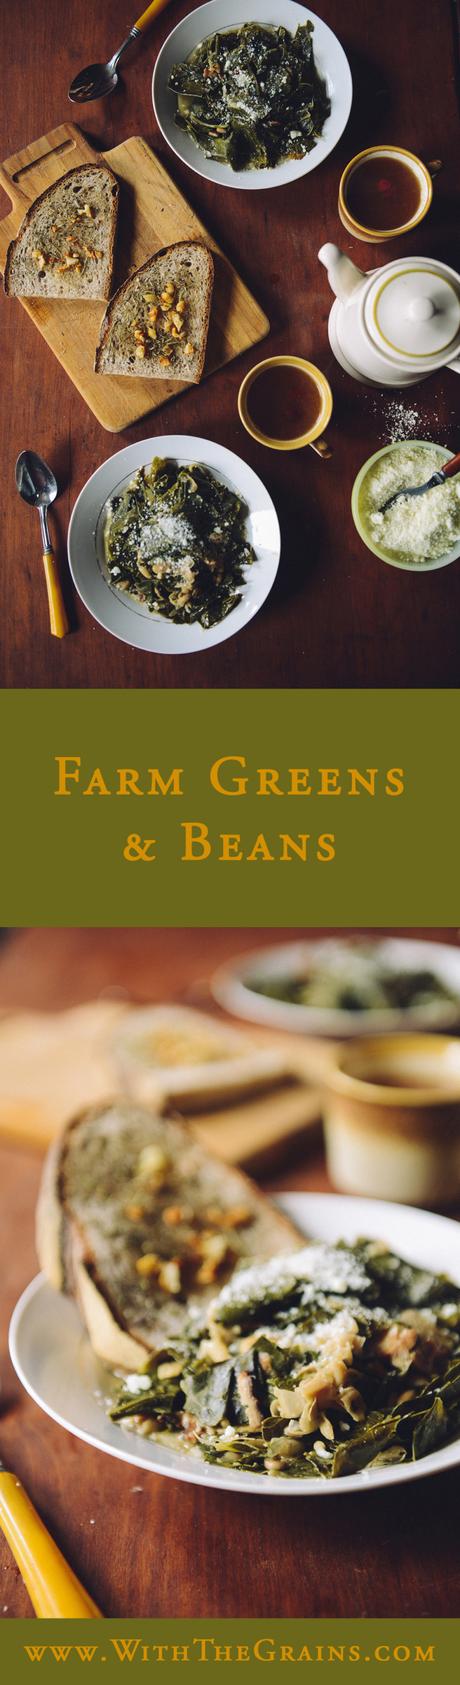 Farm Greens and Beans // www.WithTheGrains.com